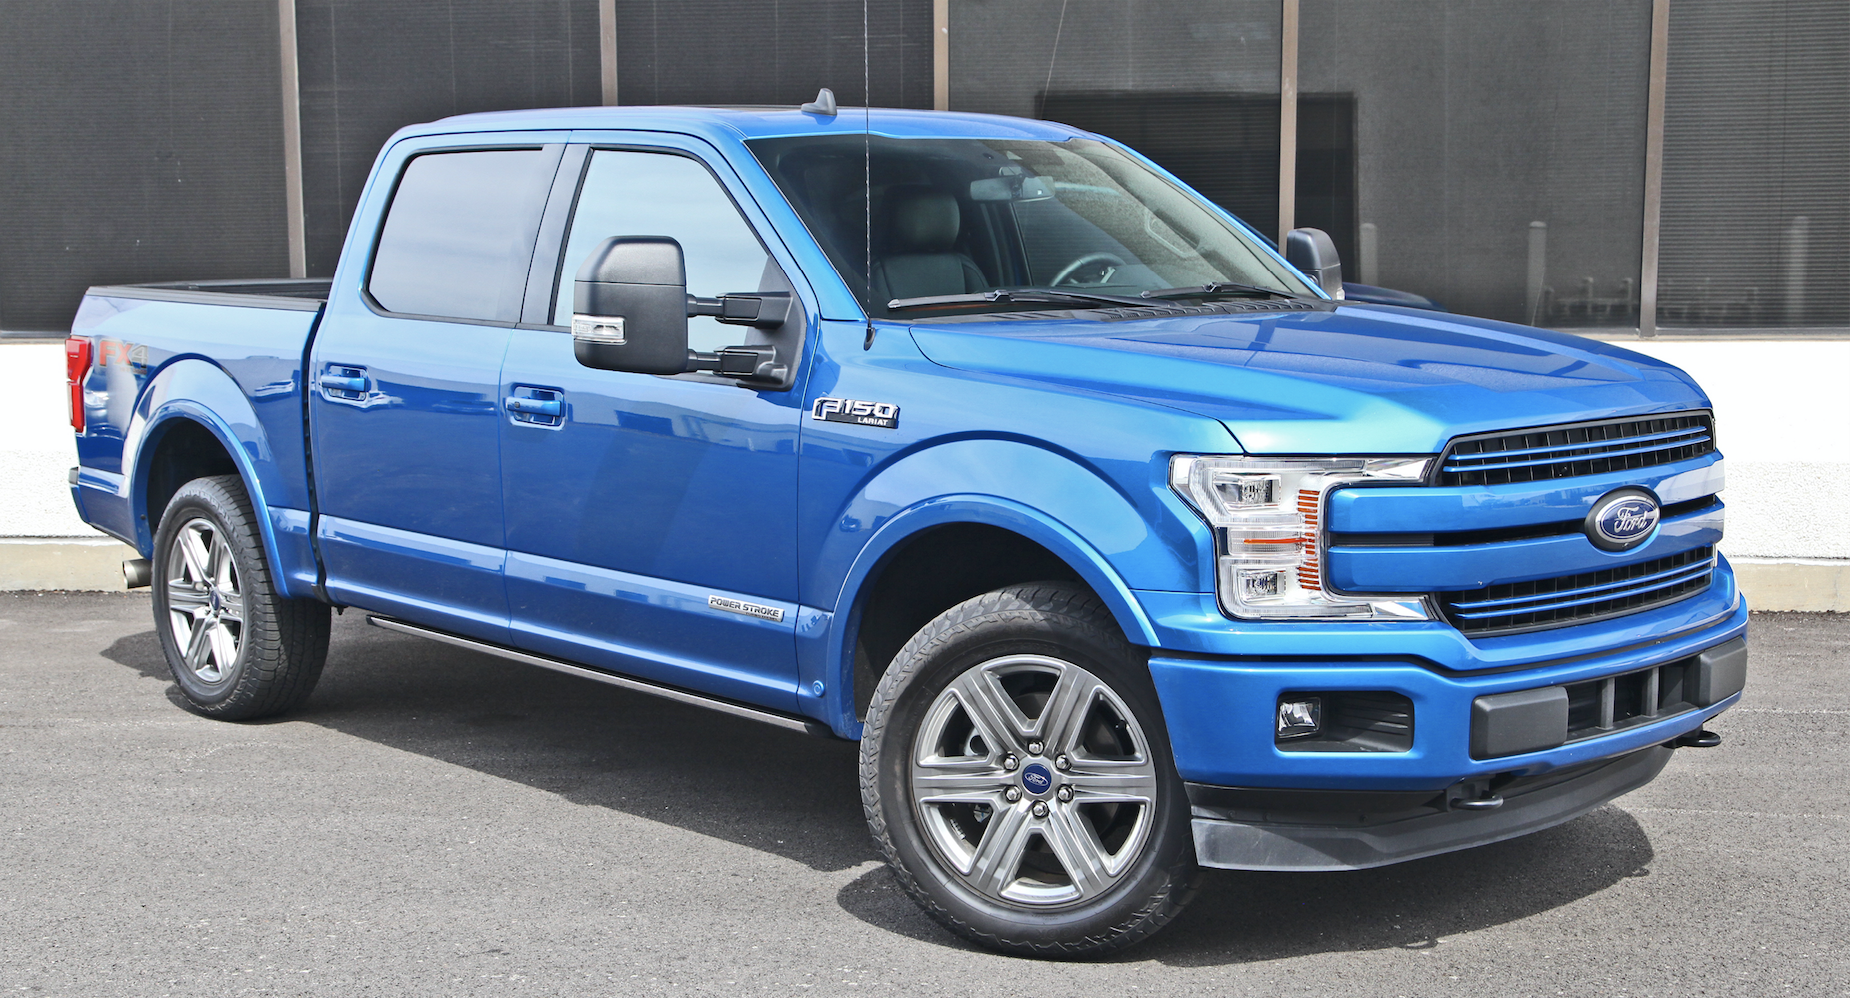 2019 Ford F 150 Power Stroke The Daily Drive Consumer Guide